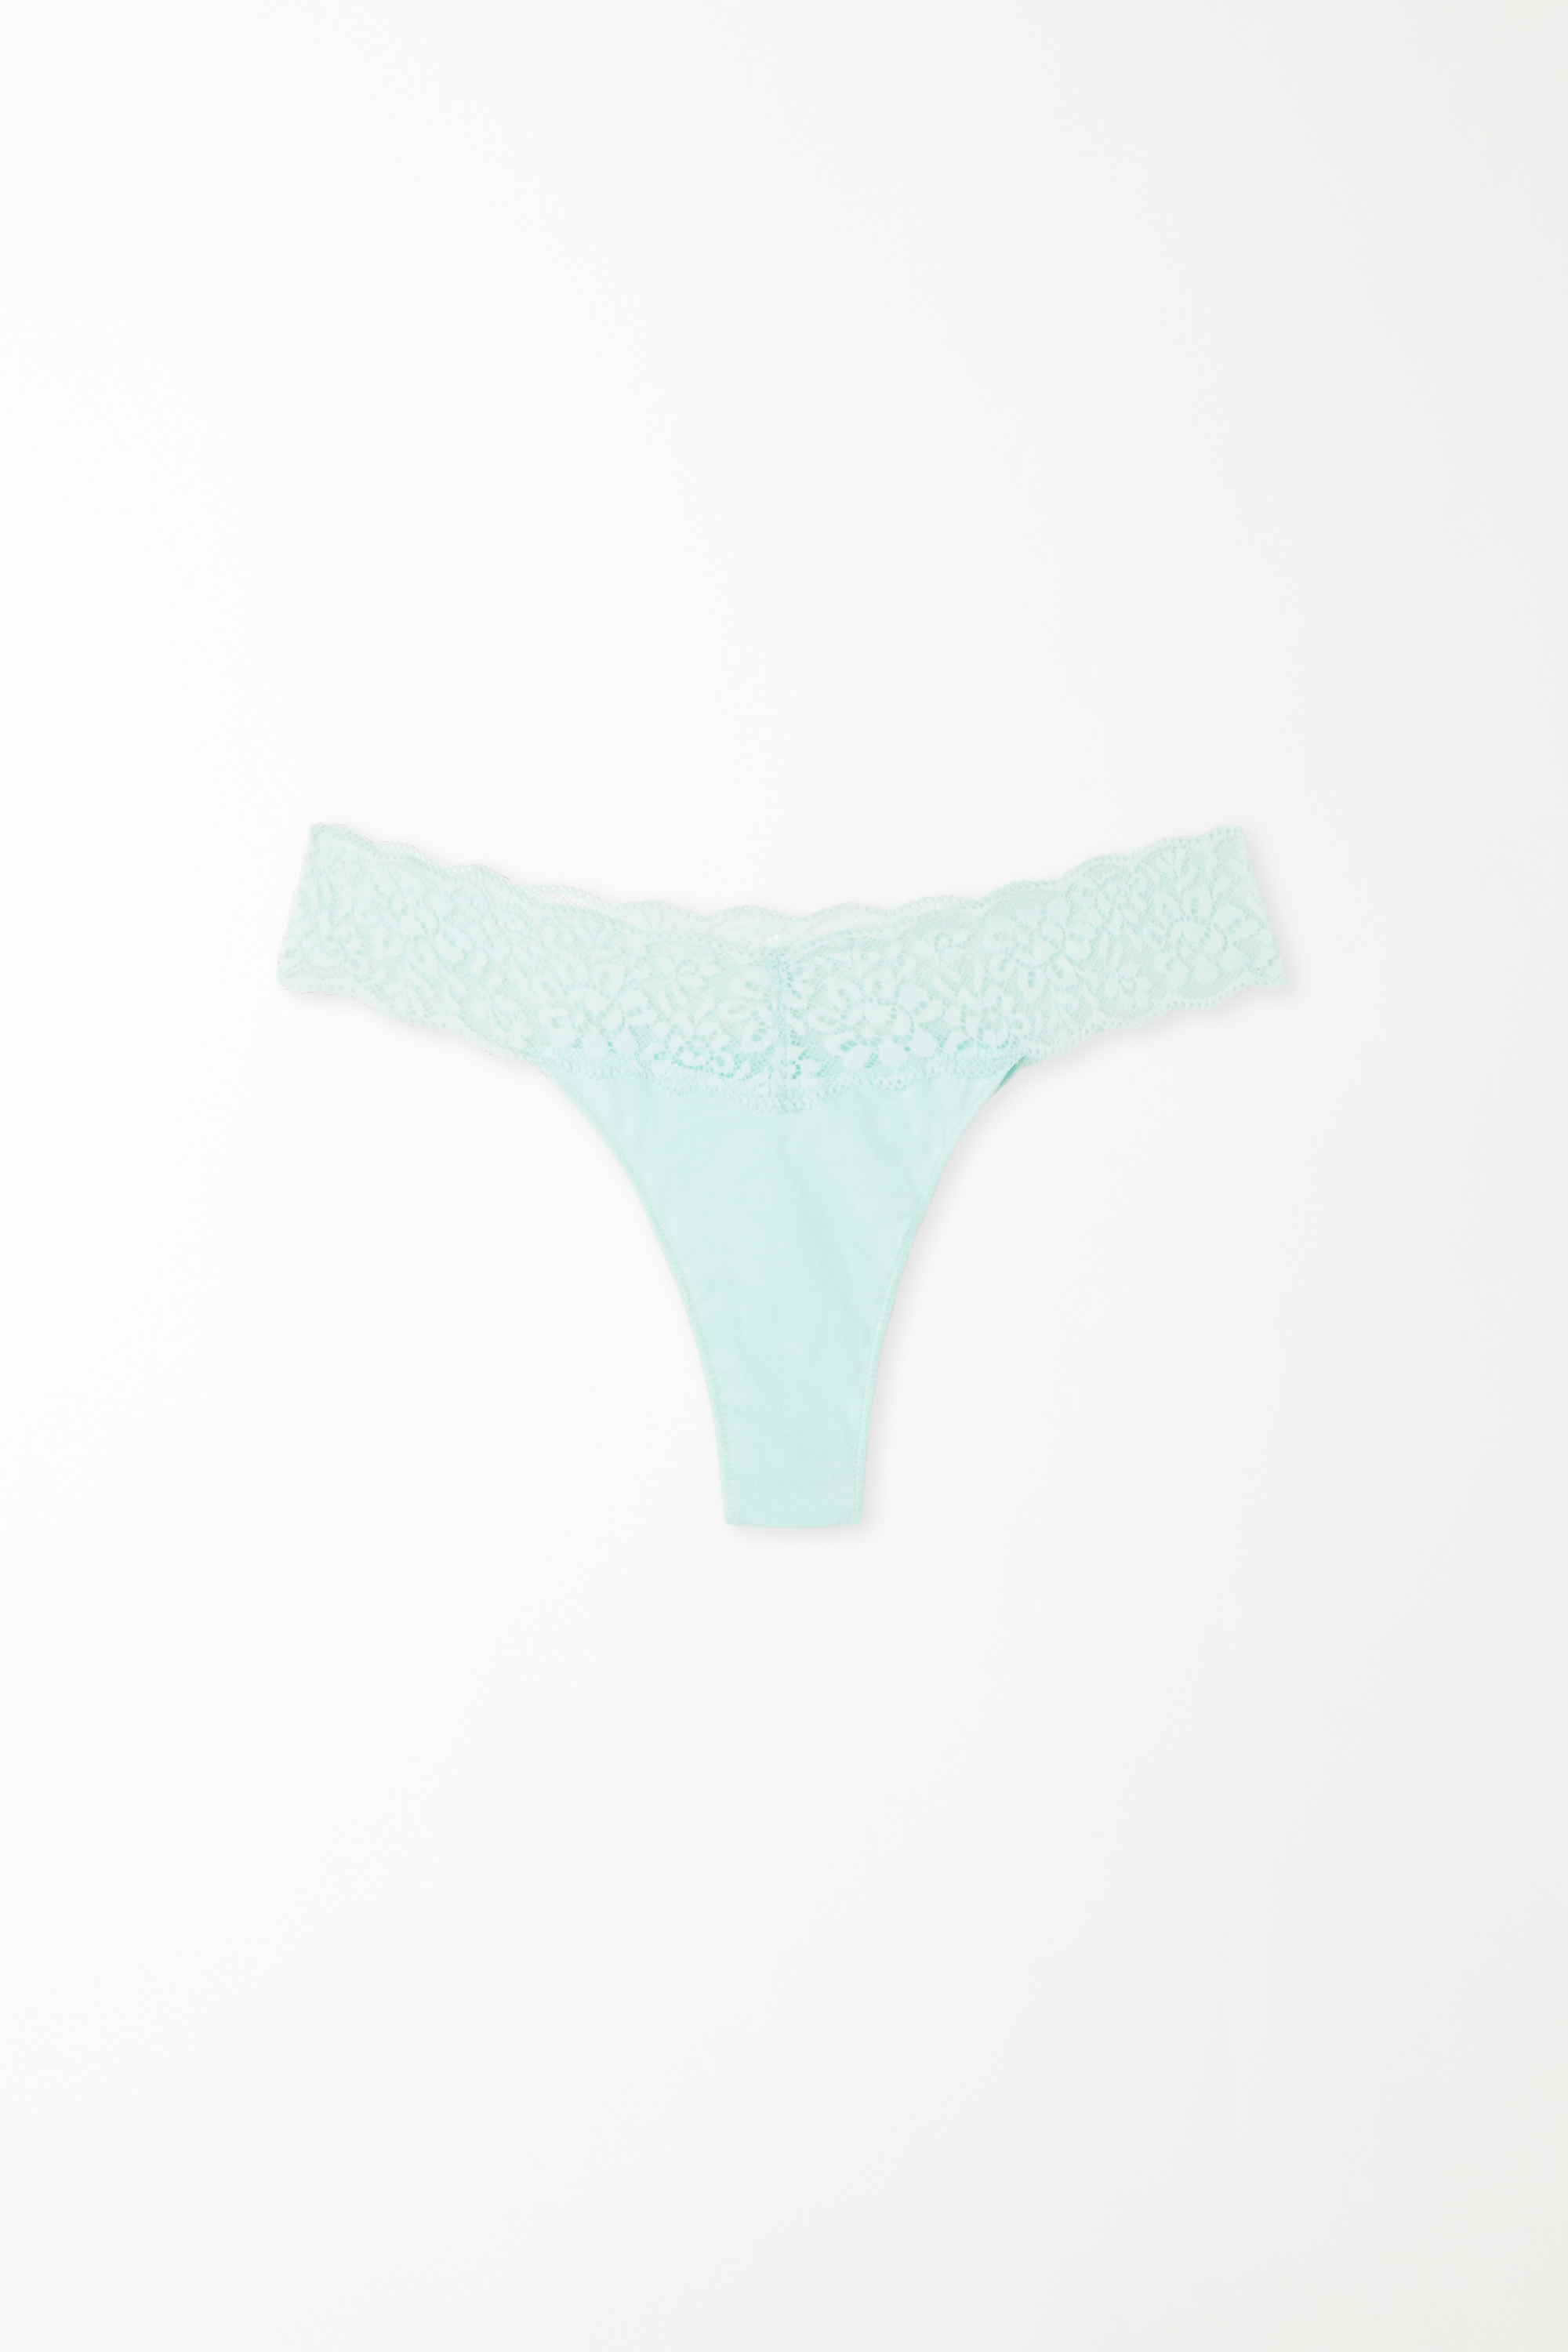 Recycled Cotton and Lace Brazilian Panties